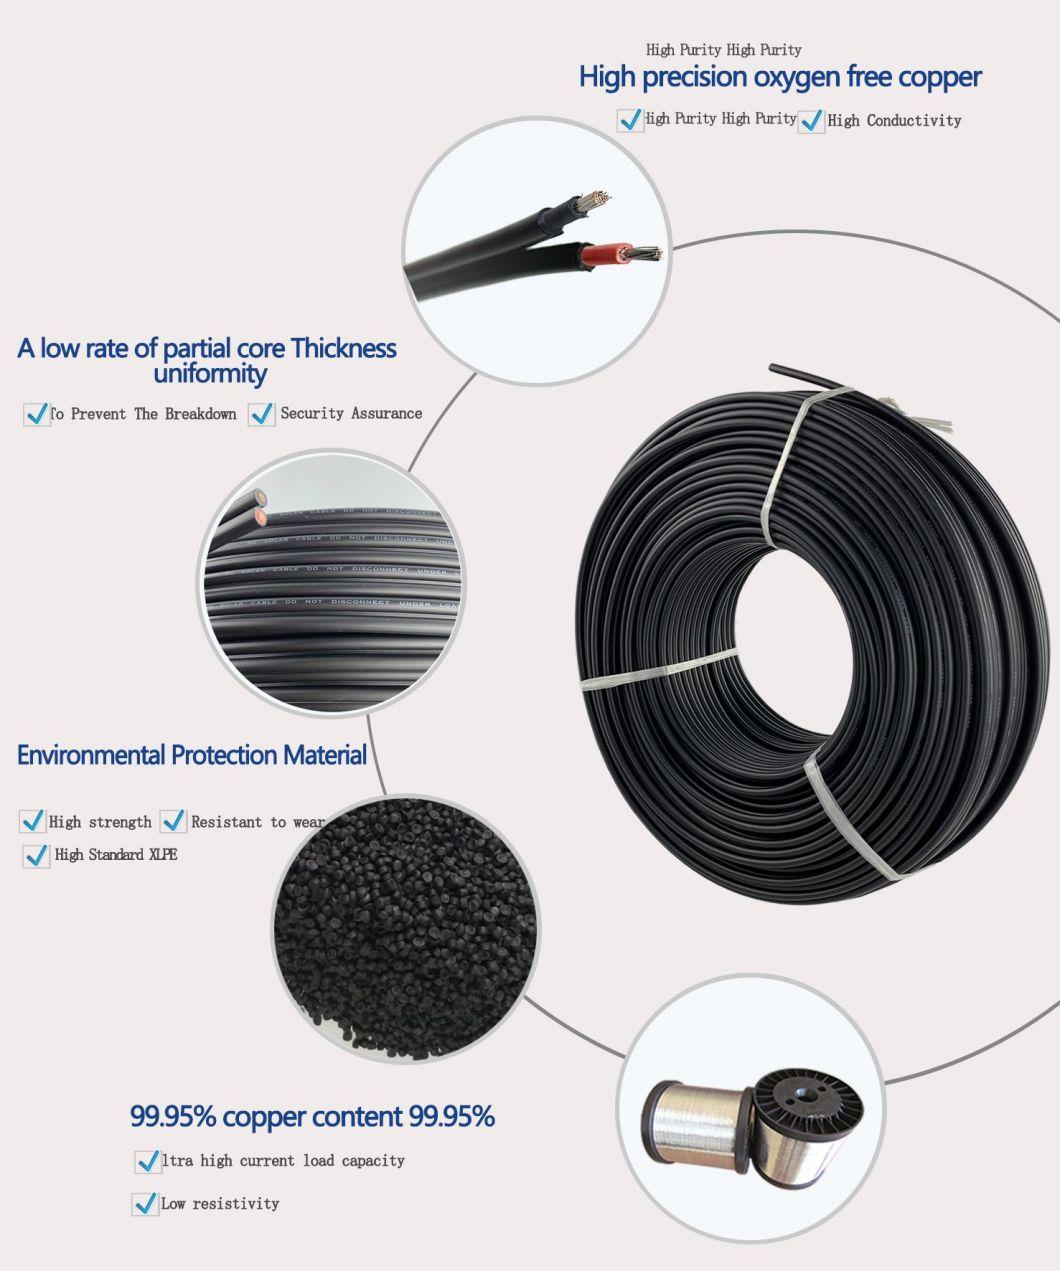 High Quality Tinned Copper Double Core Solar Cable 2*4mm TUV Approved